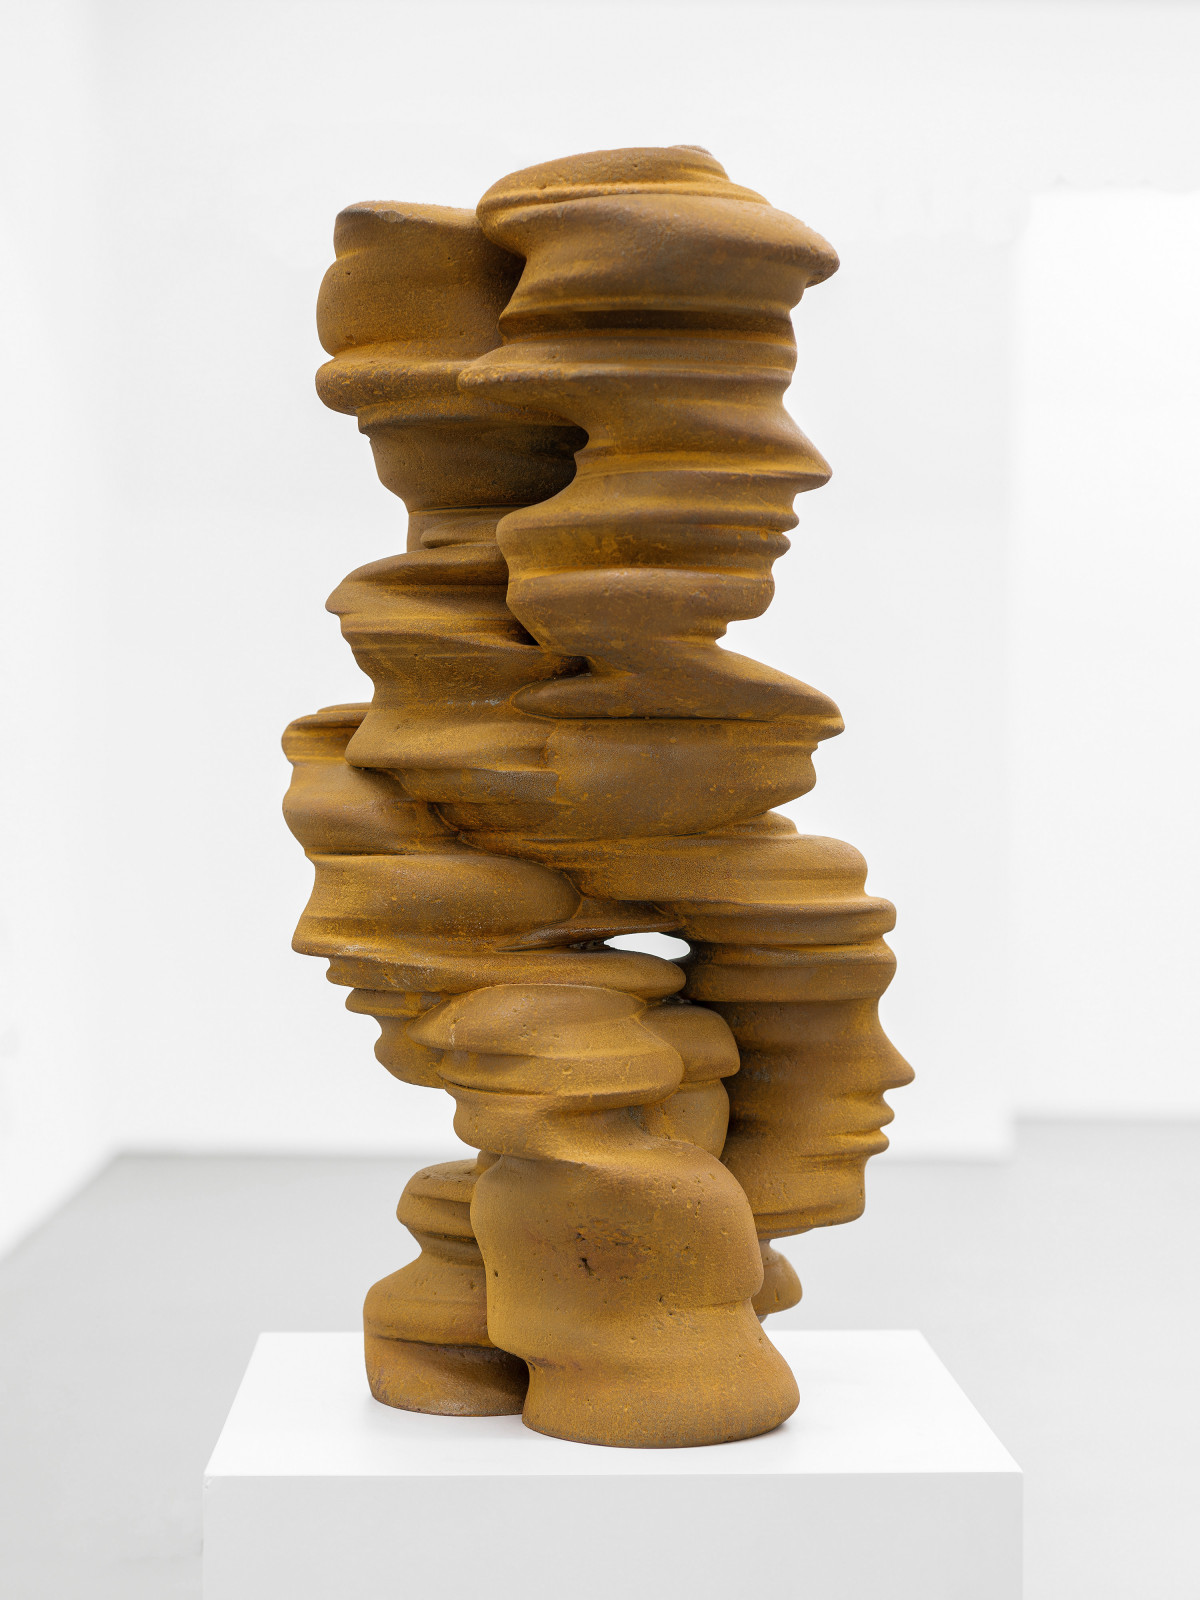 Tony Cragg, ‘Not yet titled’, 2010, Stahl